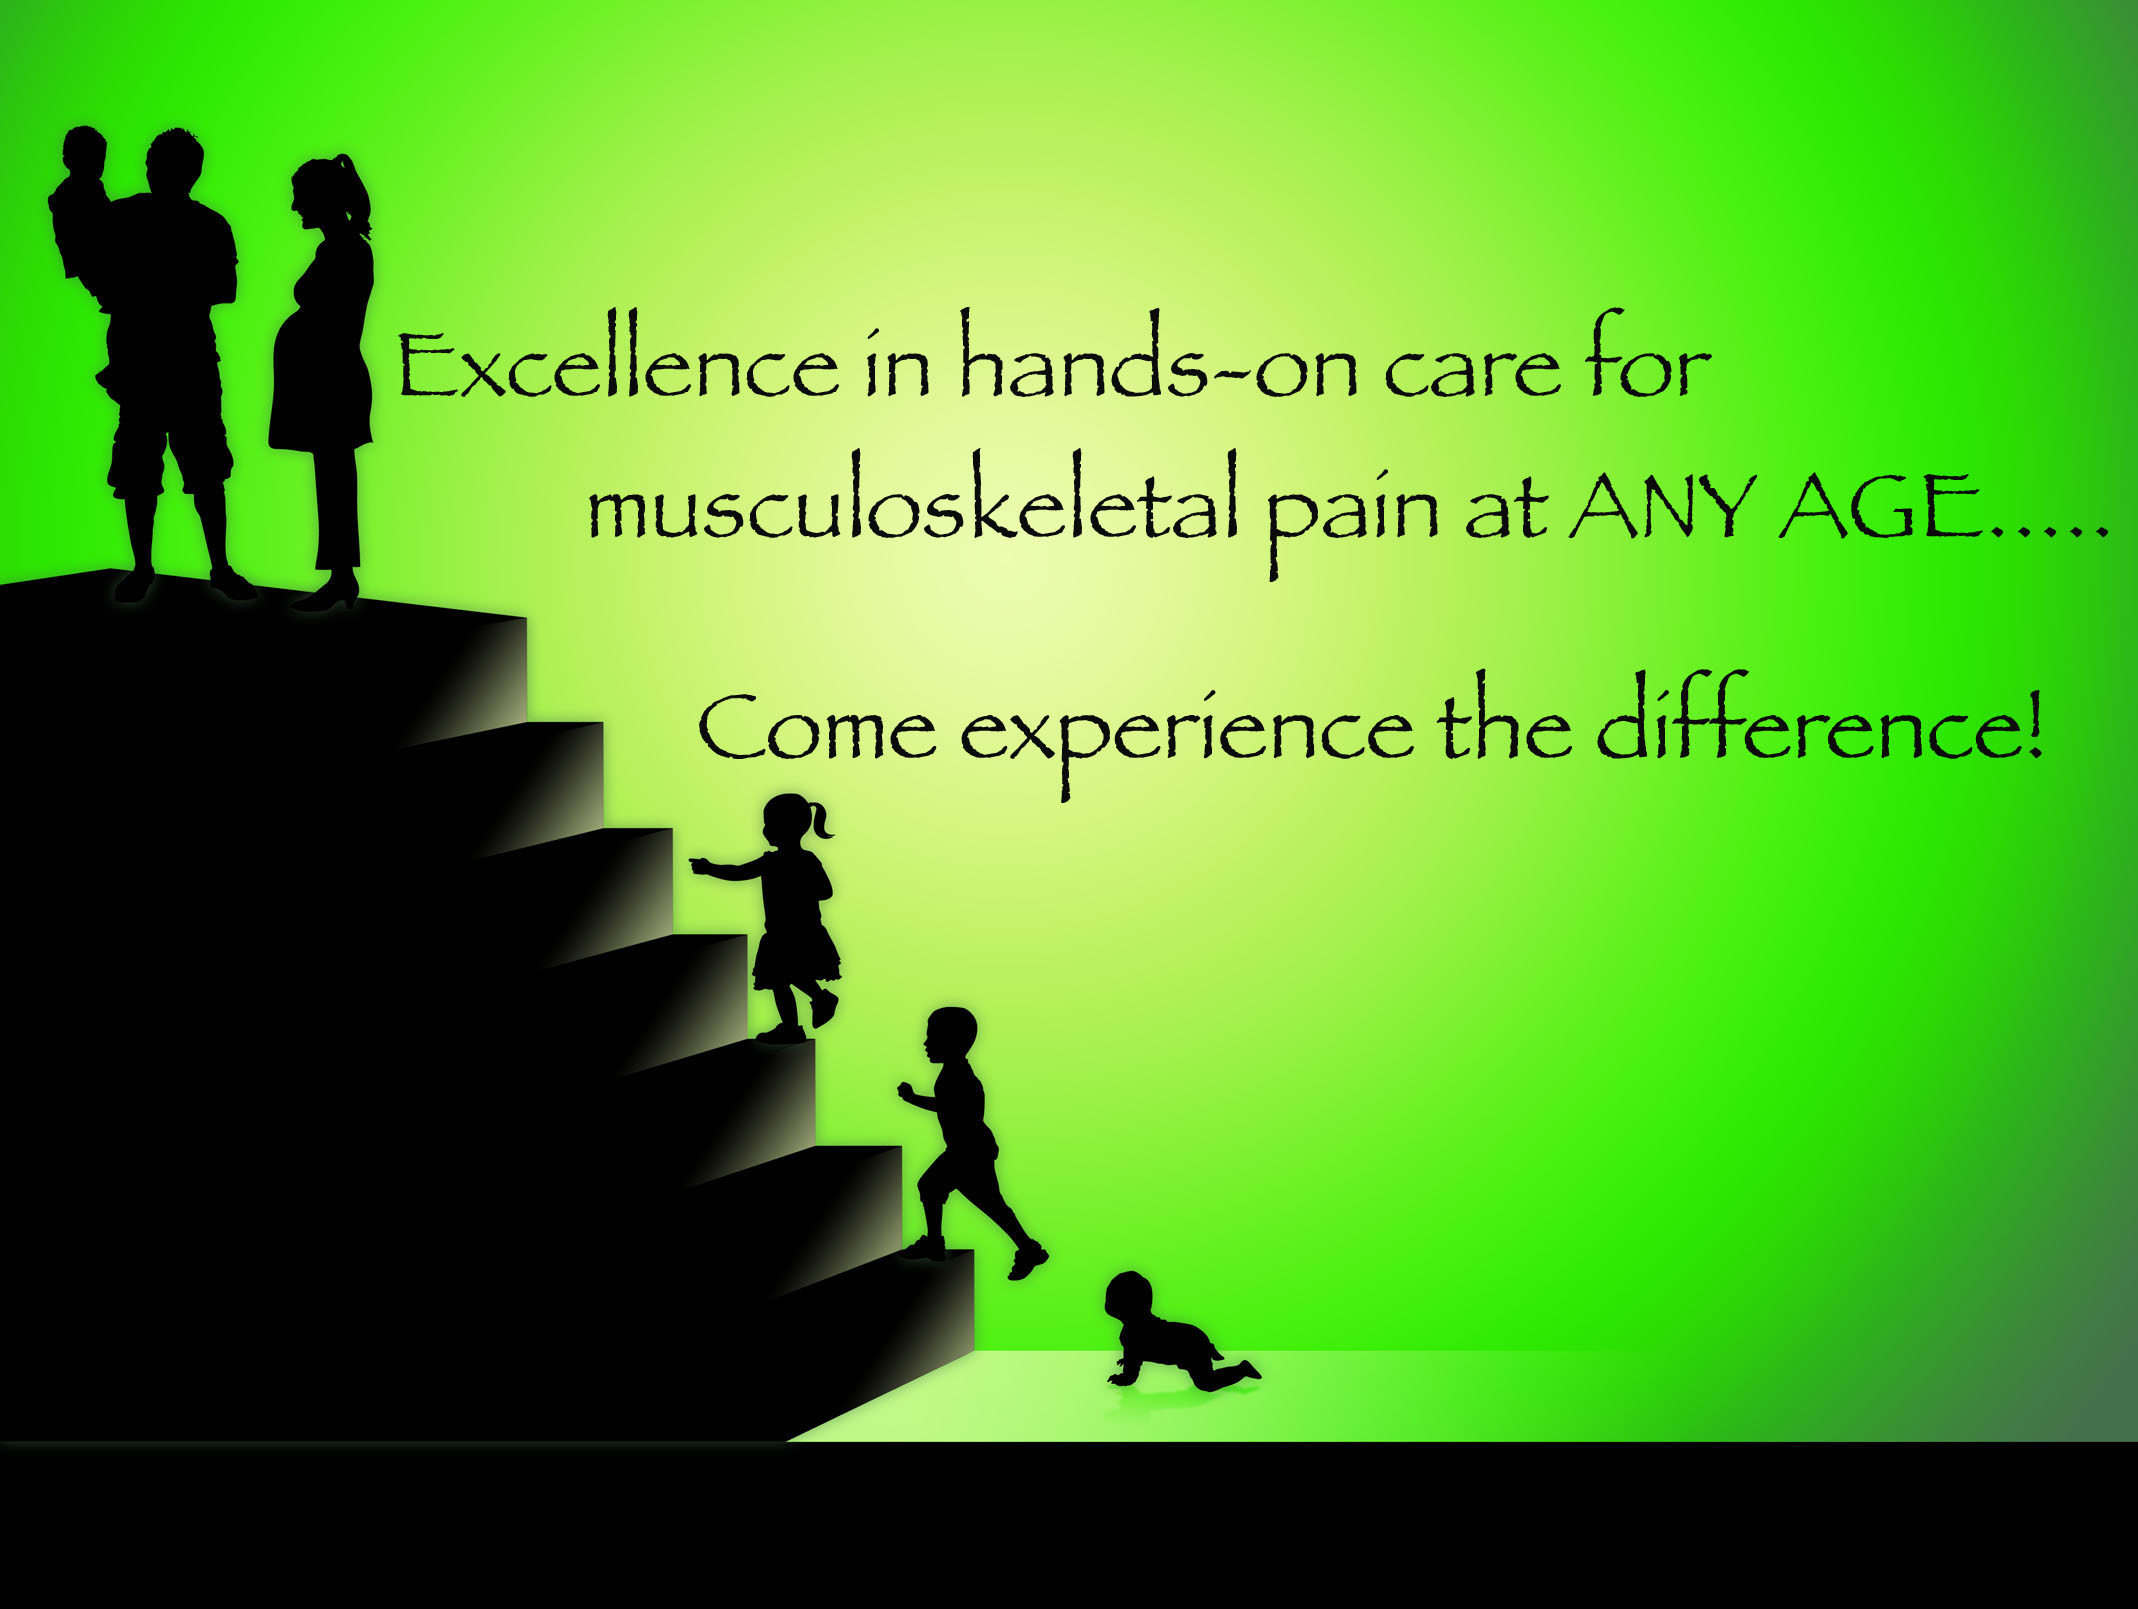 Excellence in hands-on care for musculoskeletal pain AT ANY AGE!